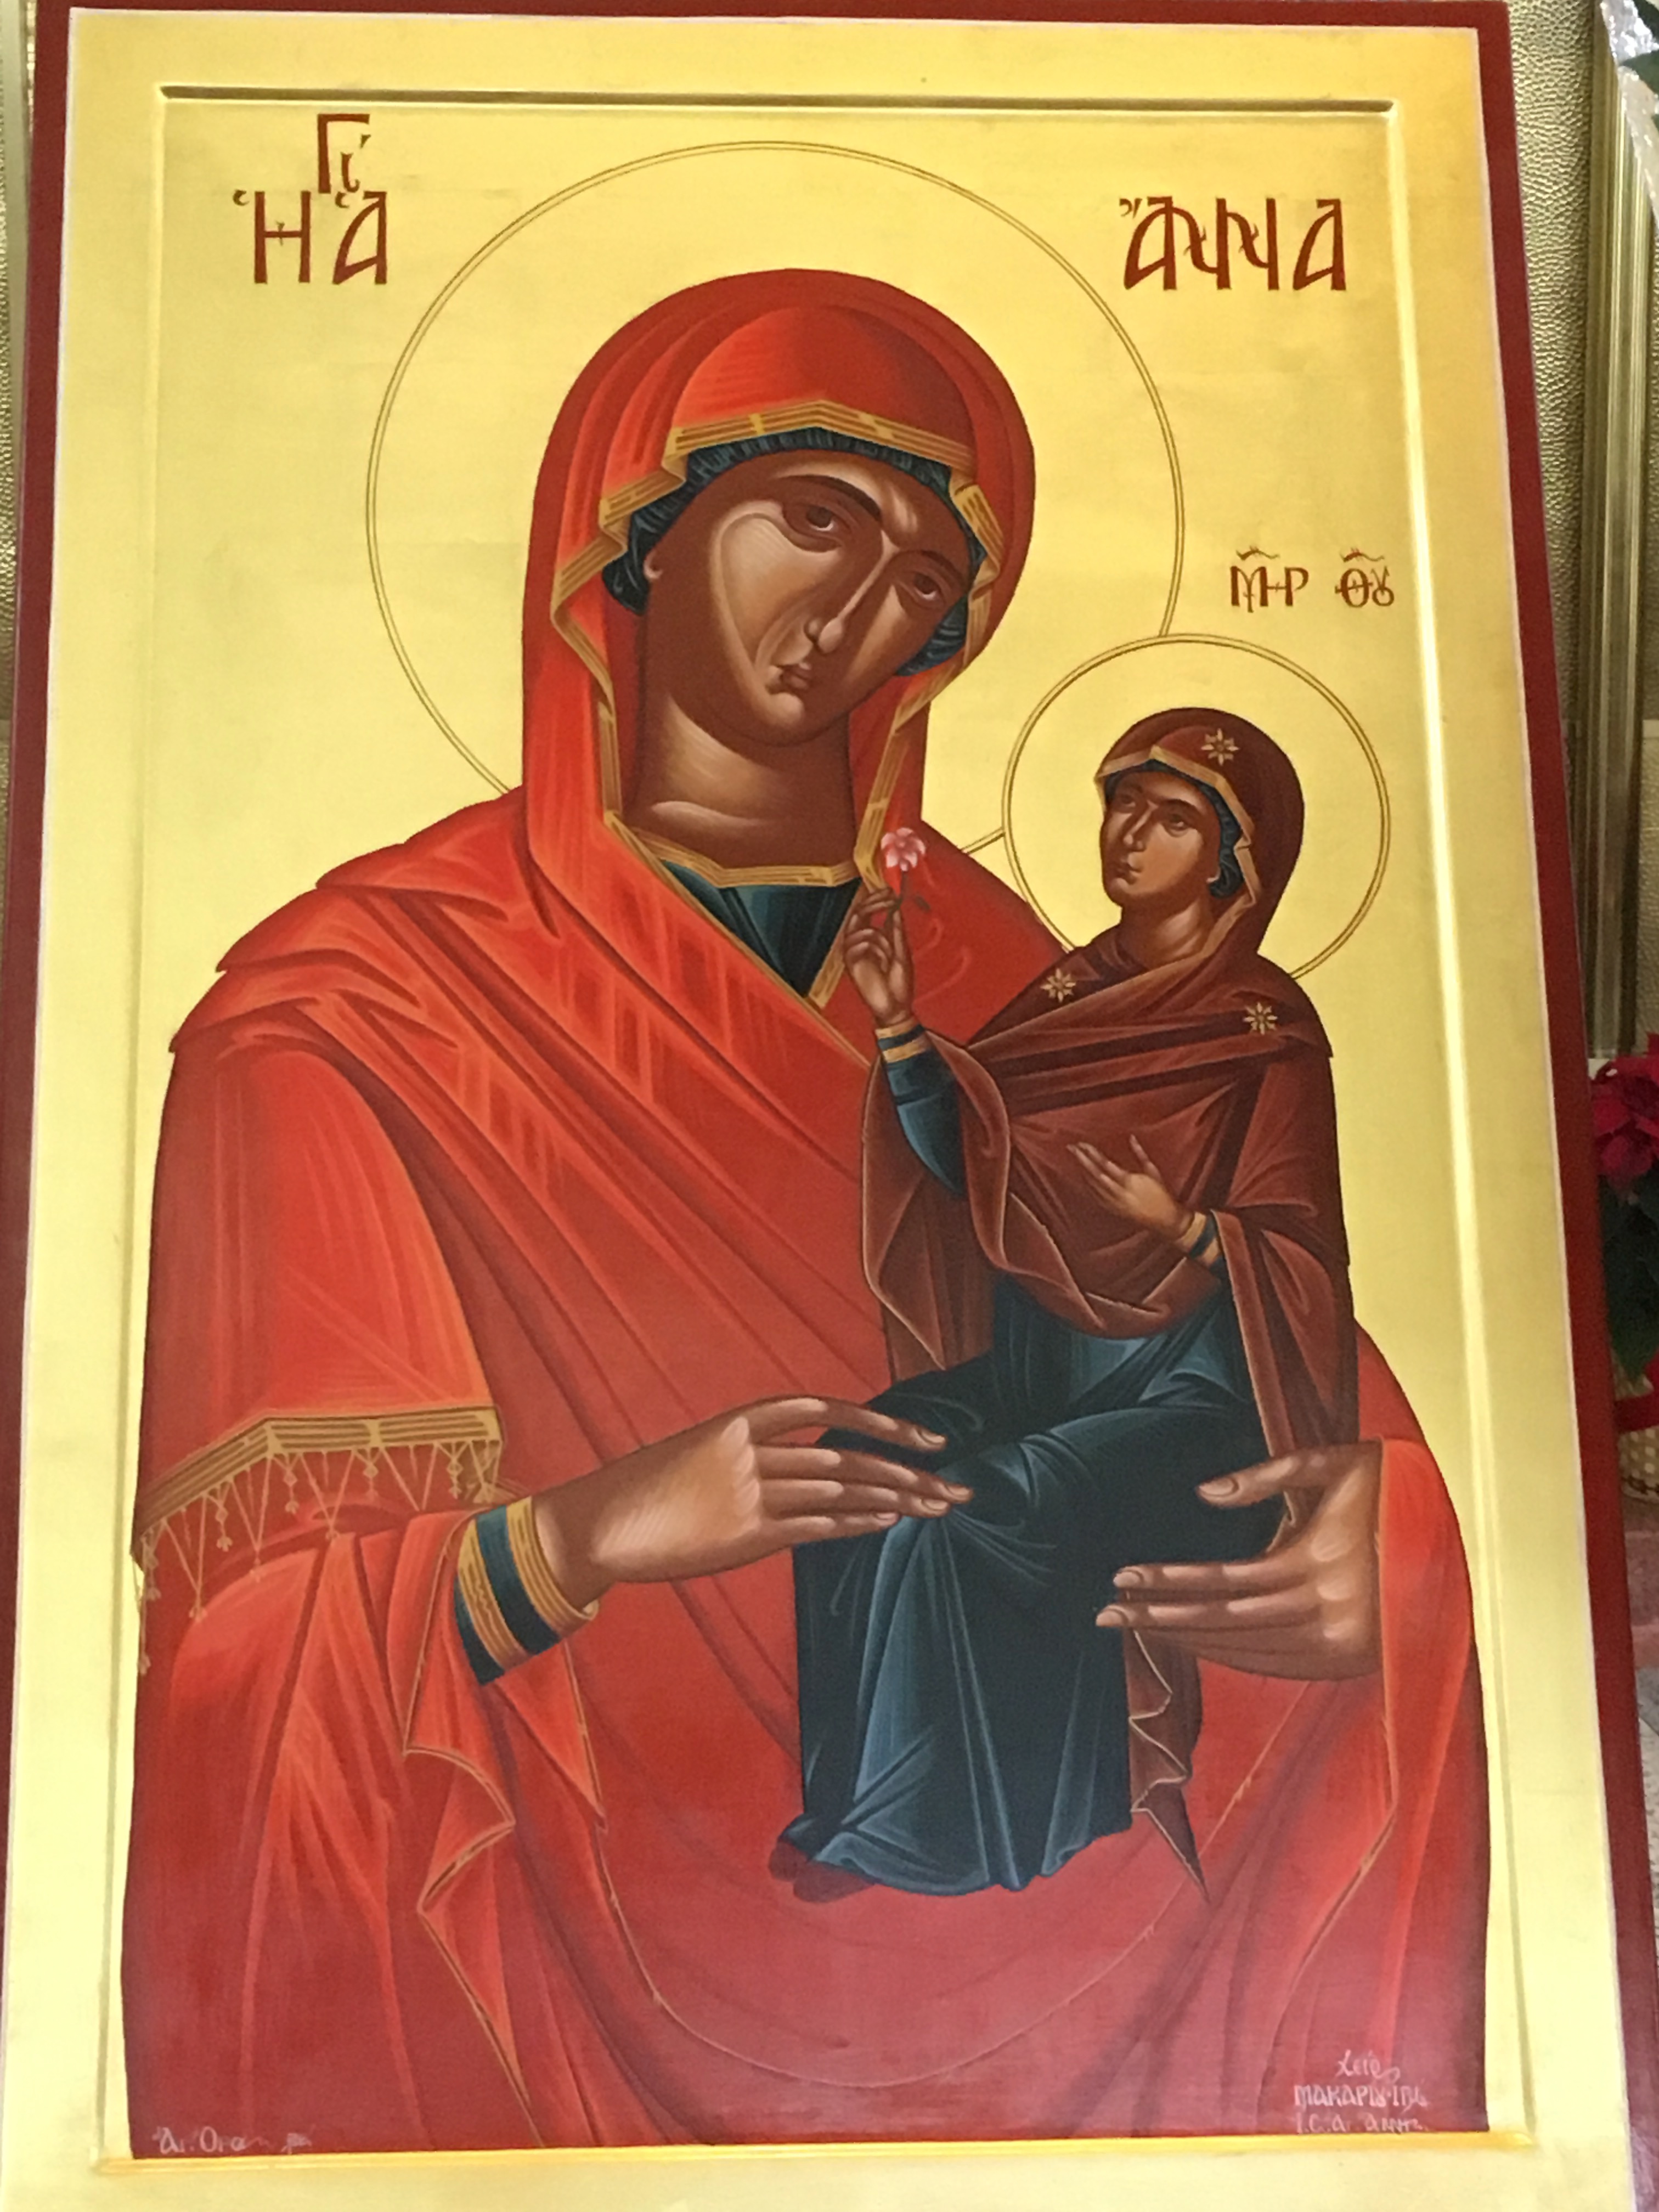 Photo of an Icon of The Nativity of the Virgin Mary, who sits on the lap of her mother, St Anna (St Ann)